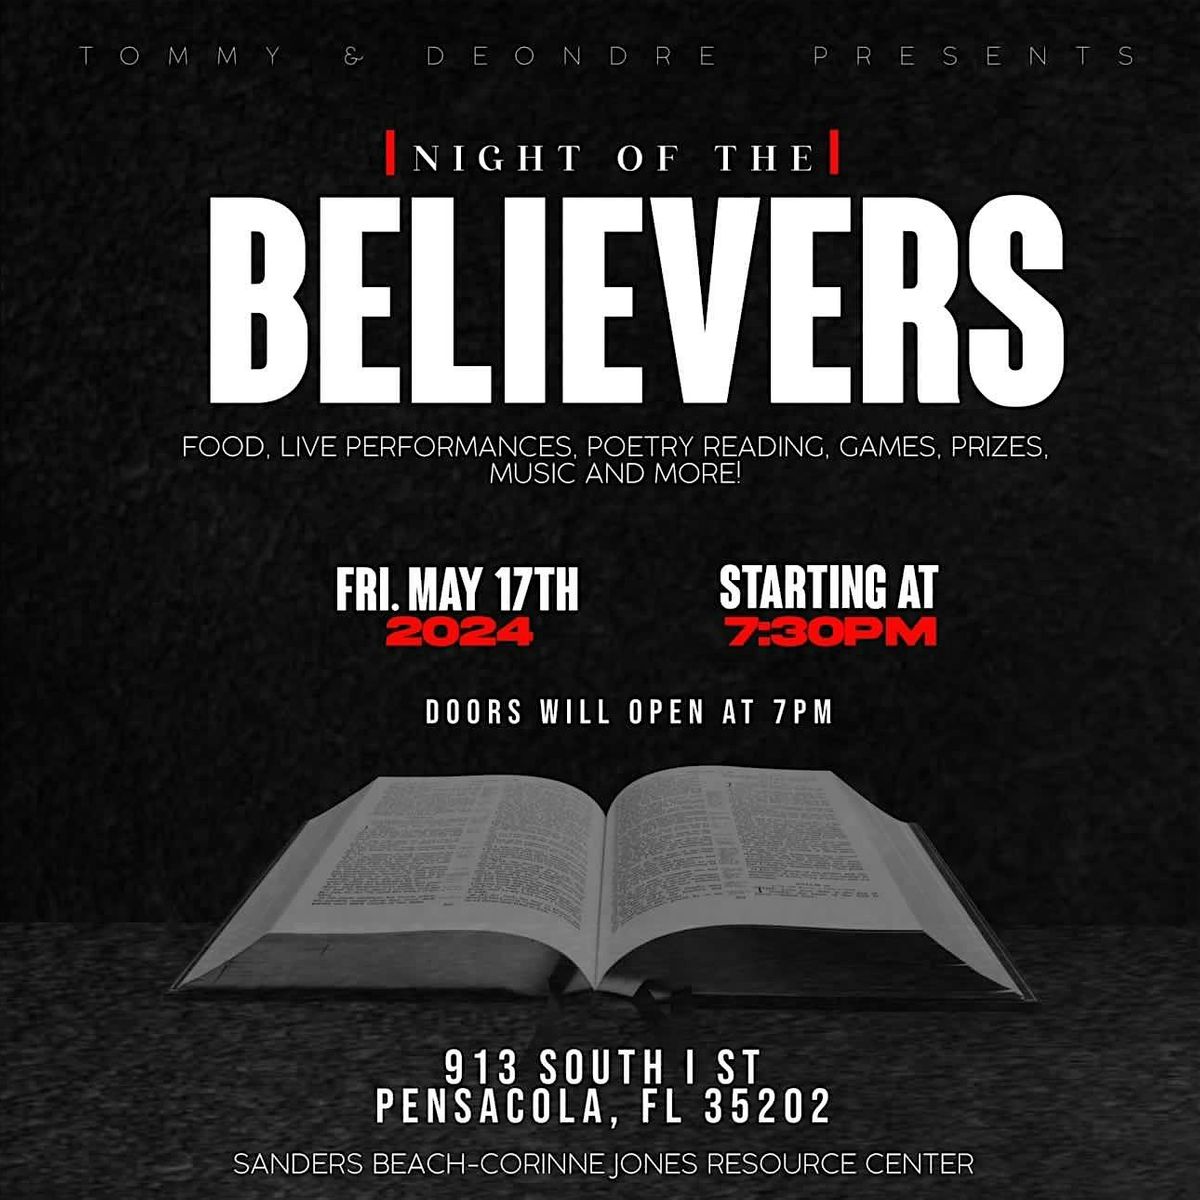 Night Of The Believers